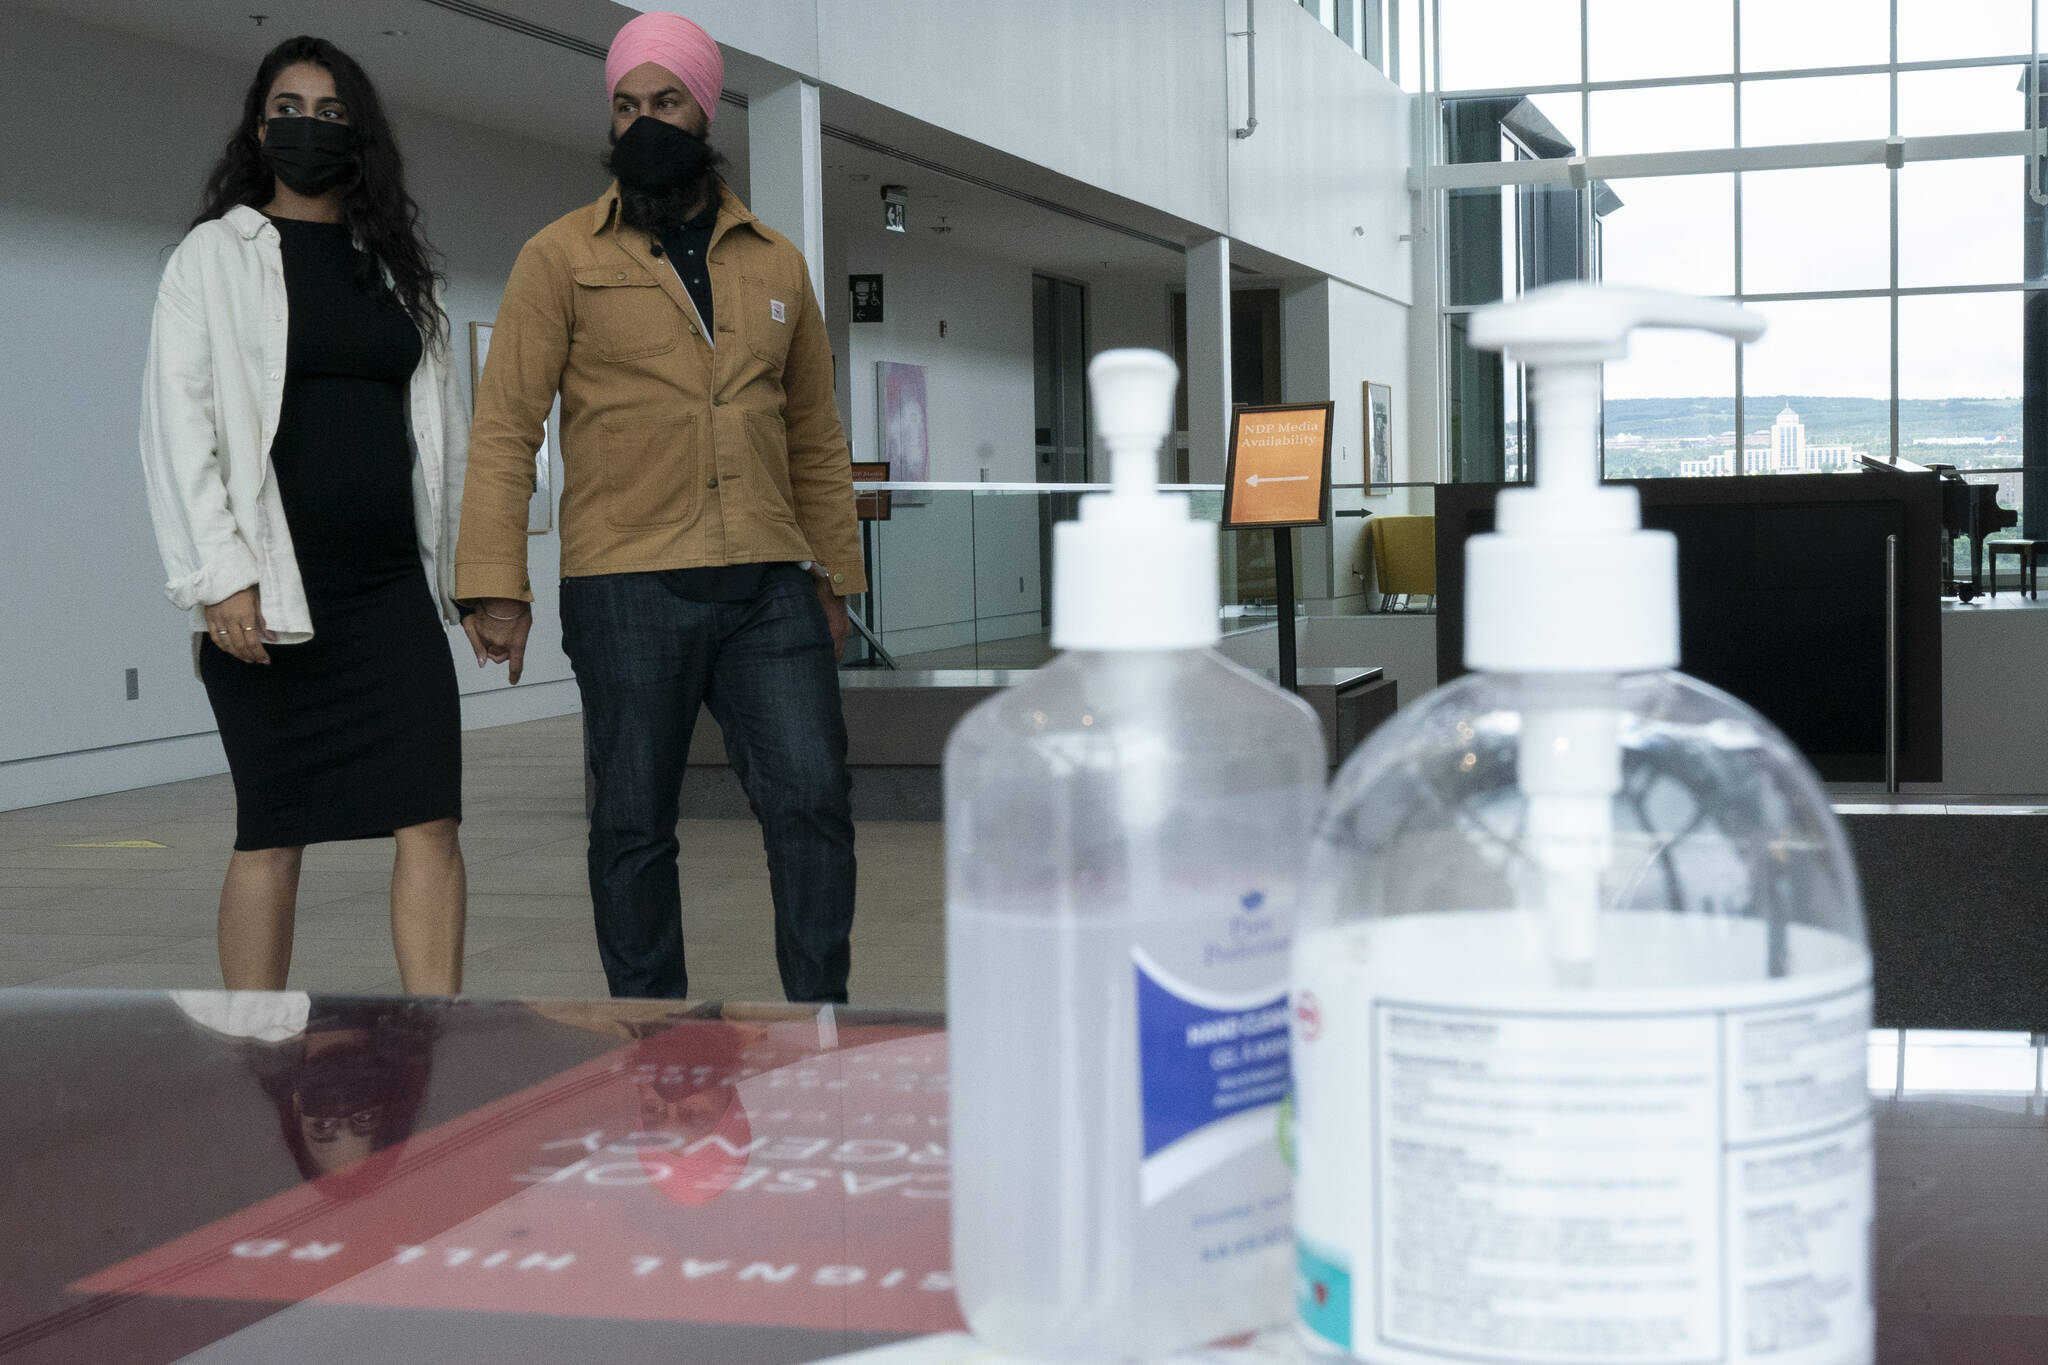 New Democratic Party Leader Jagmeet Jagmeet Singh and his wife Gurkiran Kaur Sidhu walk past hand sanitizer as they leave a campaign plane in St. John's, Saturday, Sept. 4, 2021. THE CANADIAN PRESS/Adrian Wyld